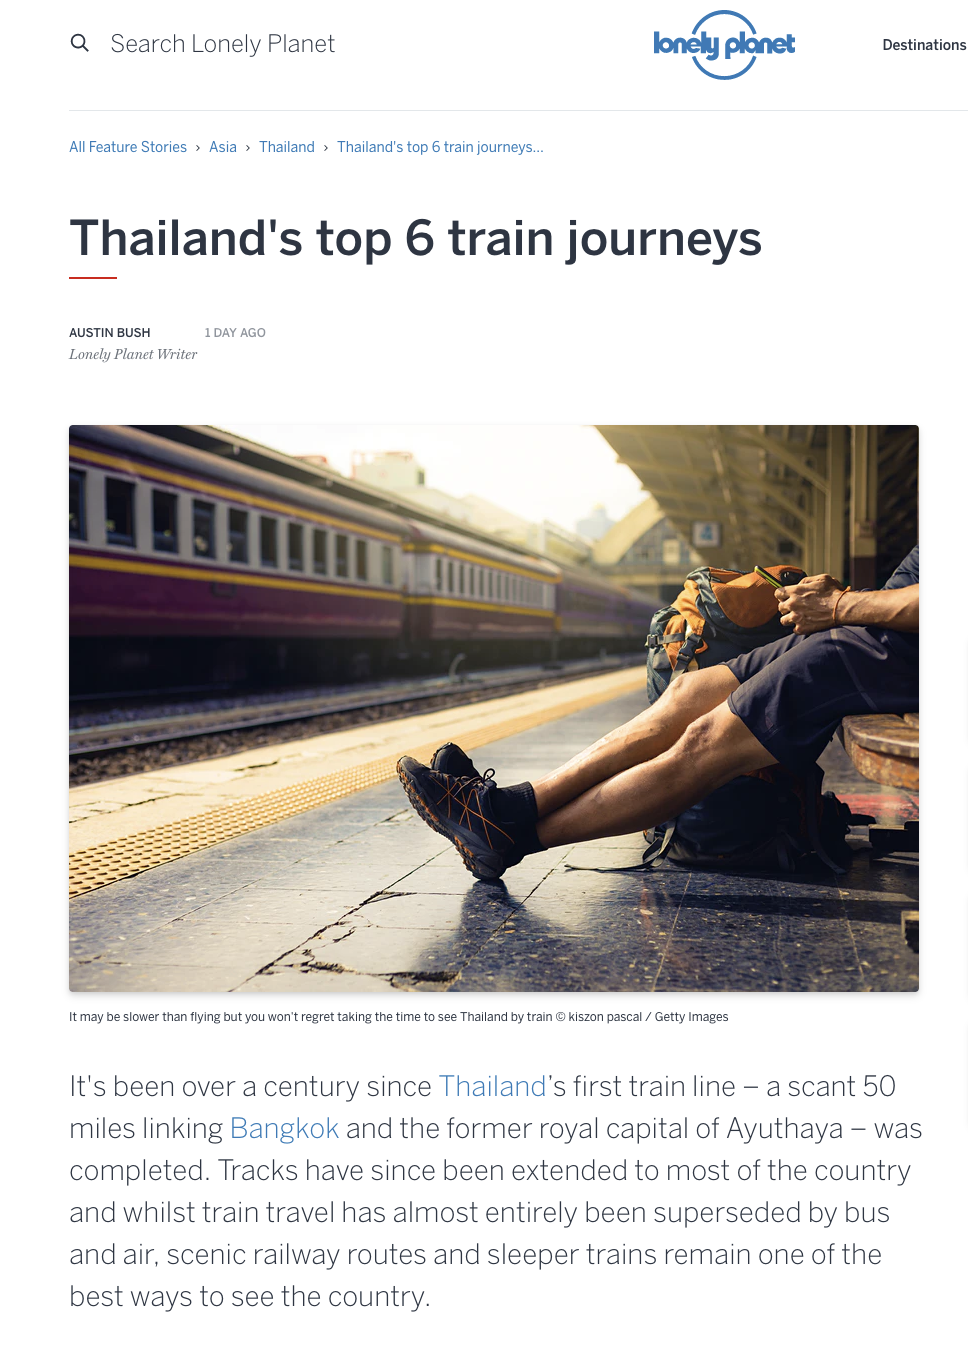  Text: “ Thailand’s top 6 train journeys ,” Lonely Planet 